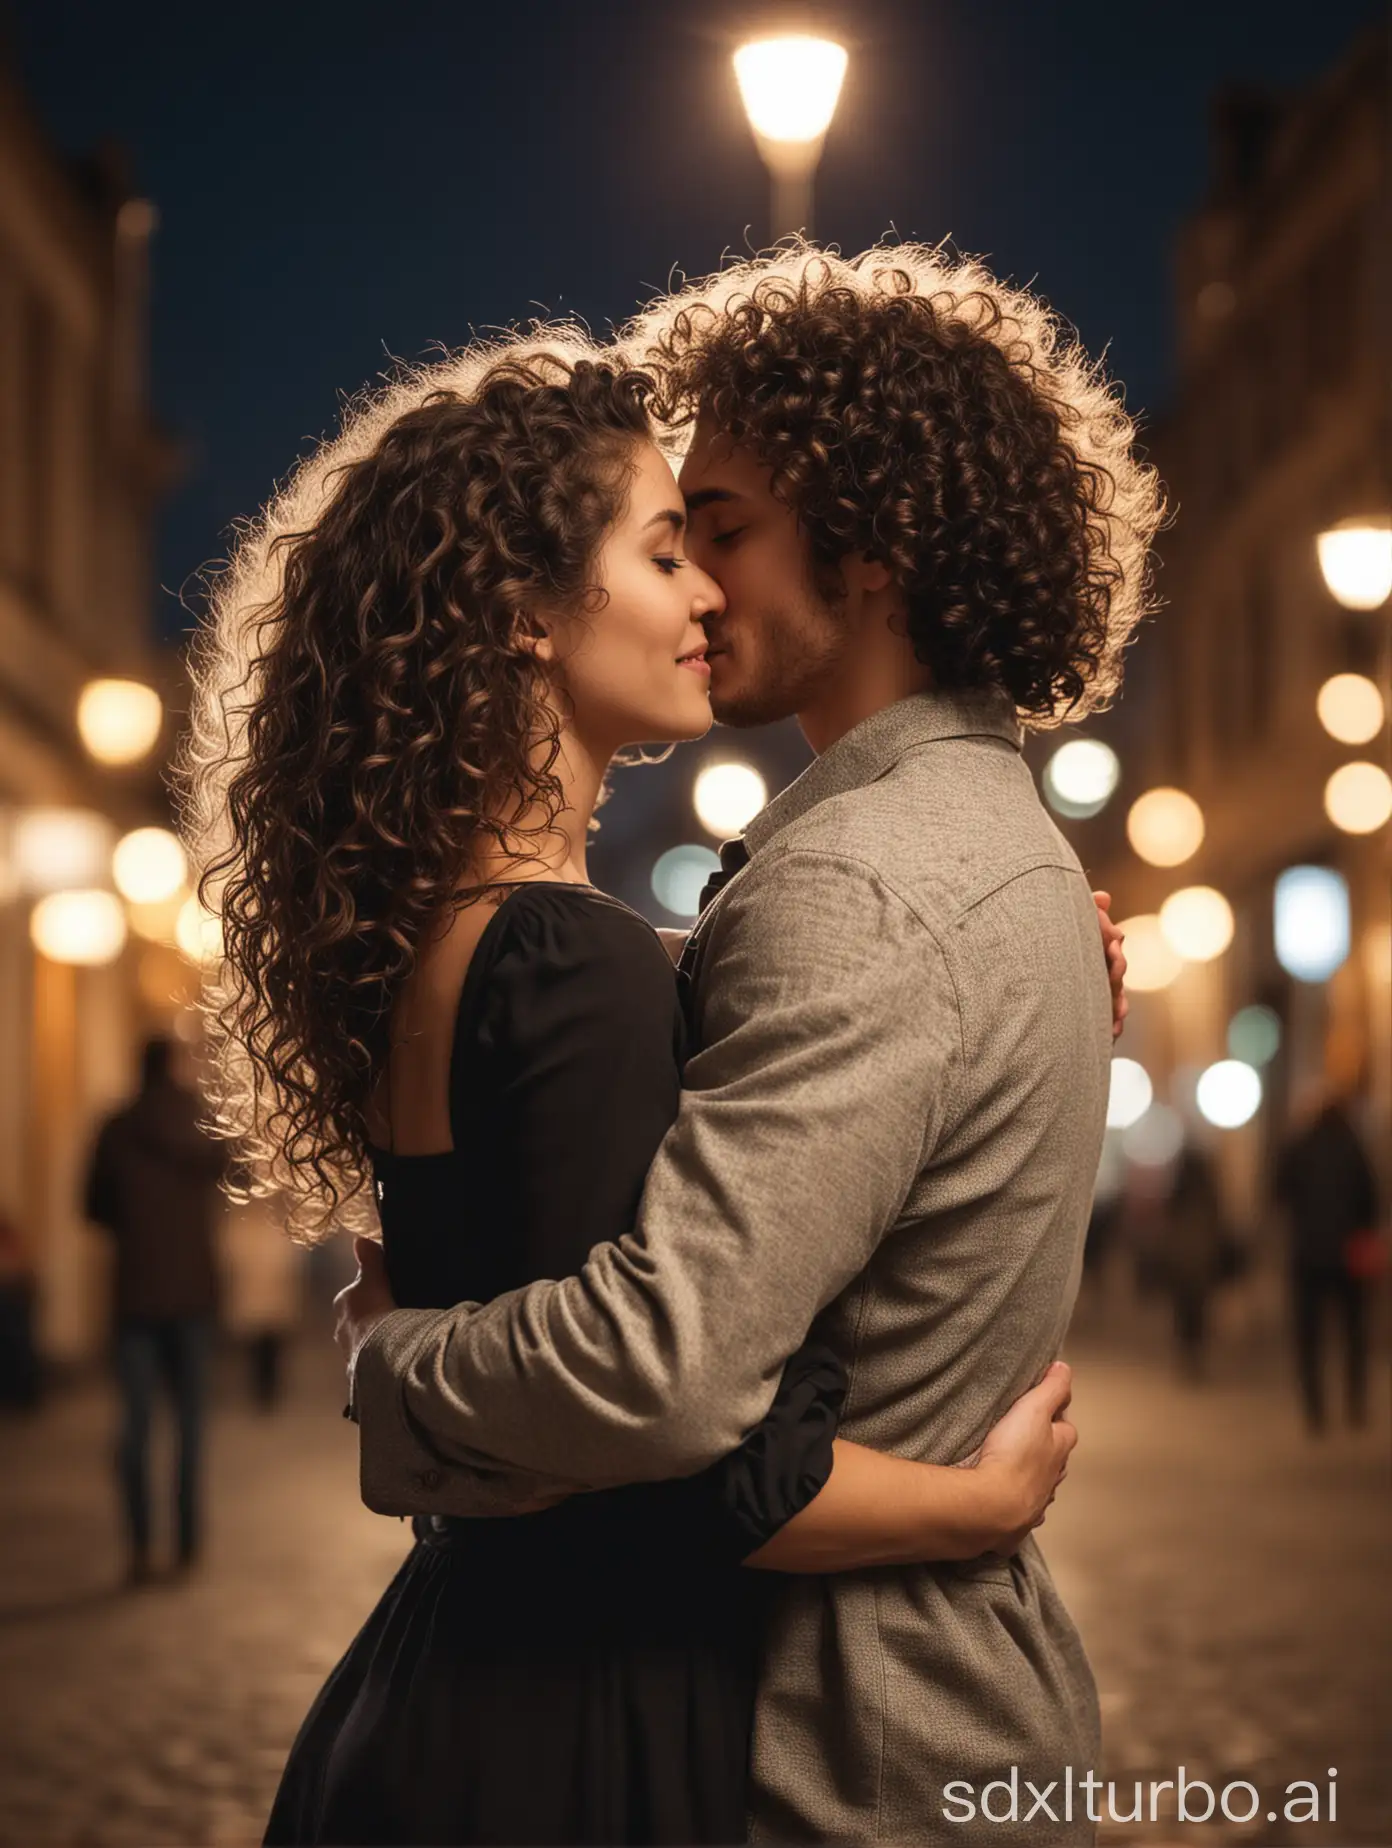 Romantic-Couple-Embracing-with-City-Lights-in-Background